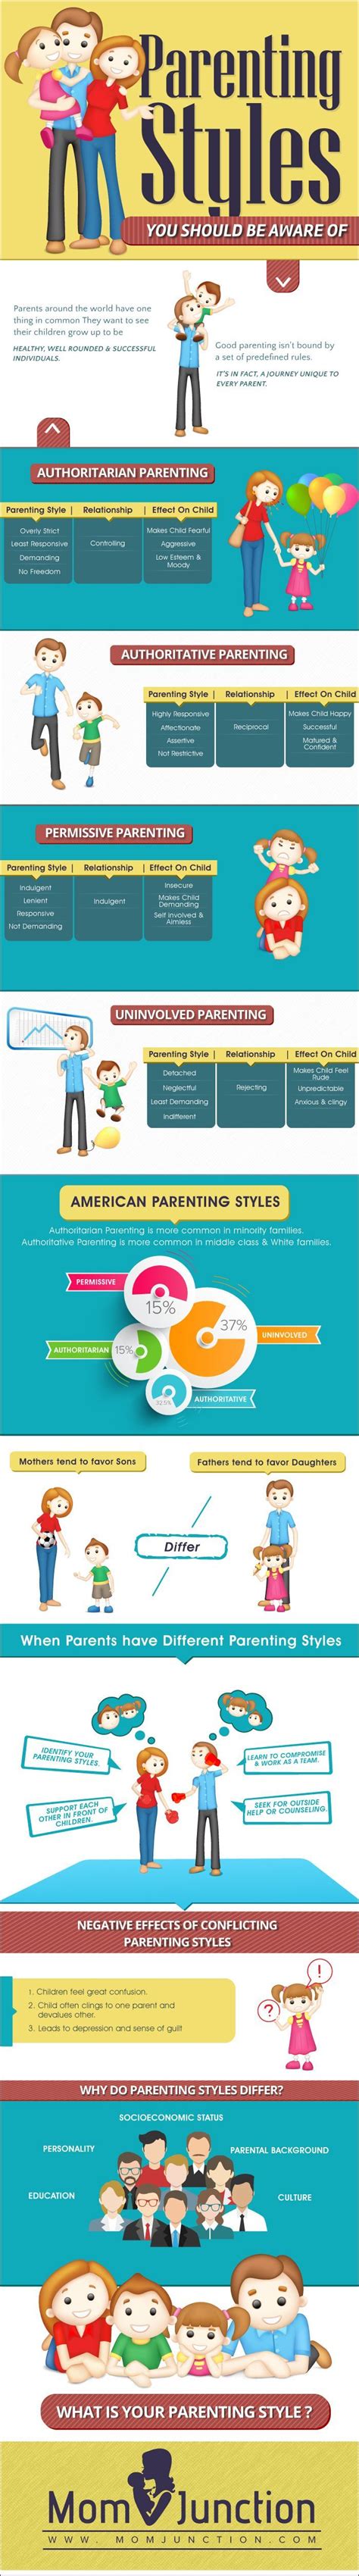 4 Parenting Styles You Should Be Aware Of | Children s ...